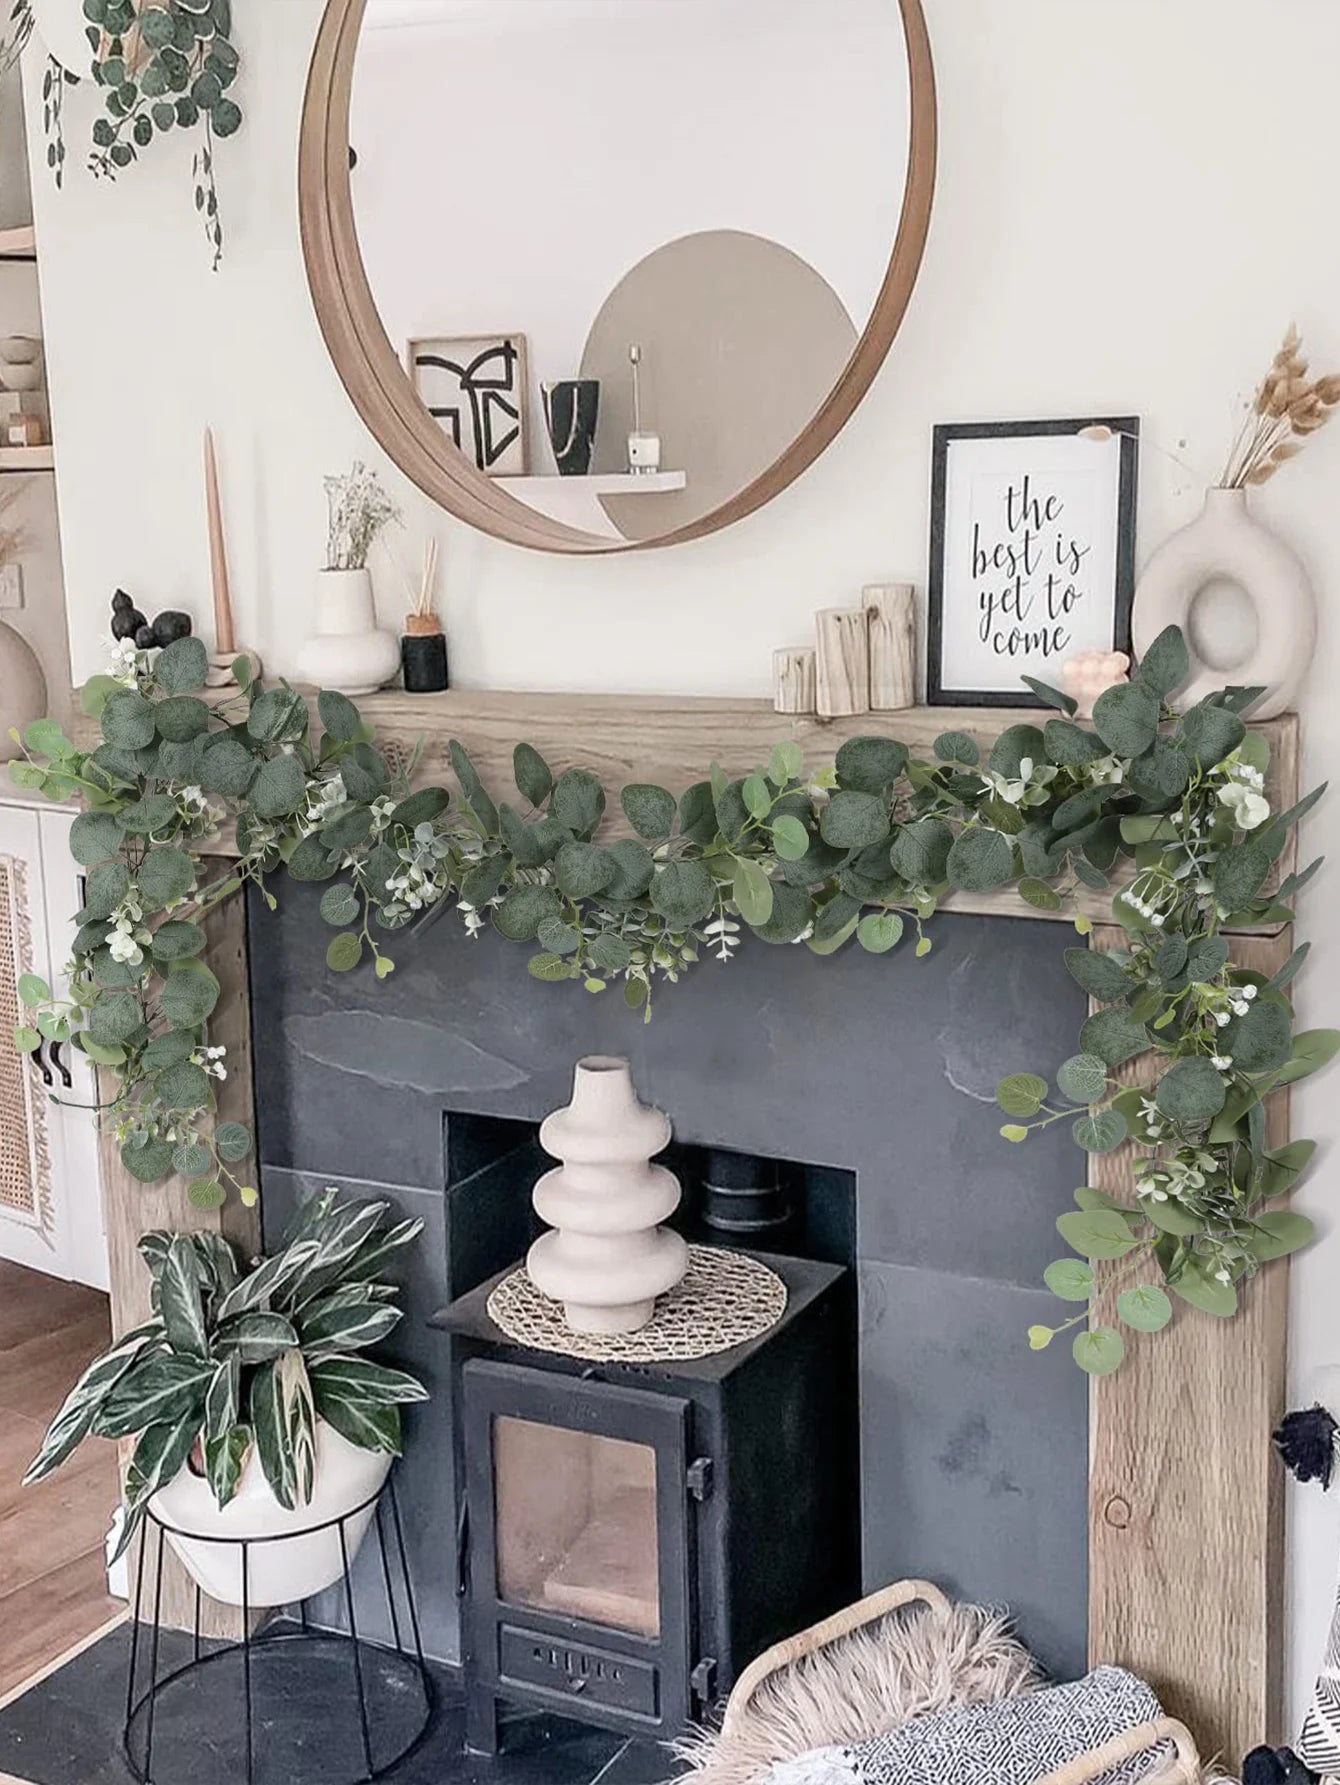 1pc Artificial Eucalyptus Leaves Greenery Garland Faux Plant Spring Vines with White Flowers Berries for Wedding Home Party Deco - Bee's to Find